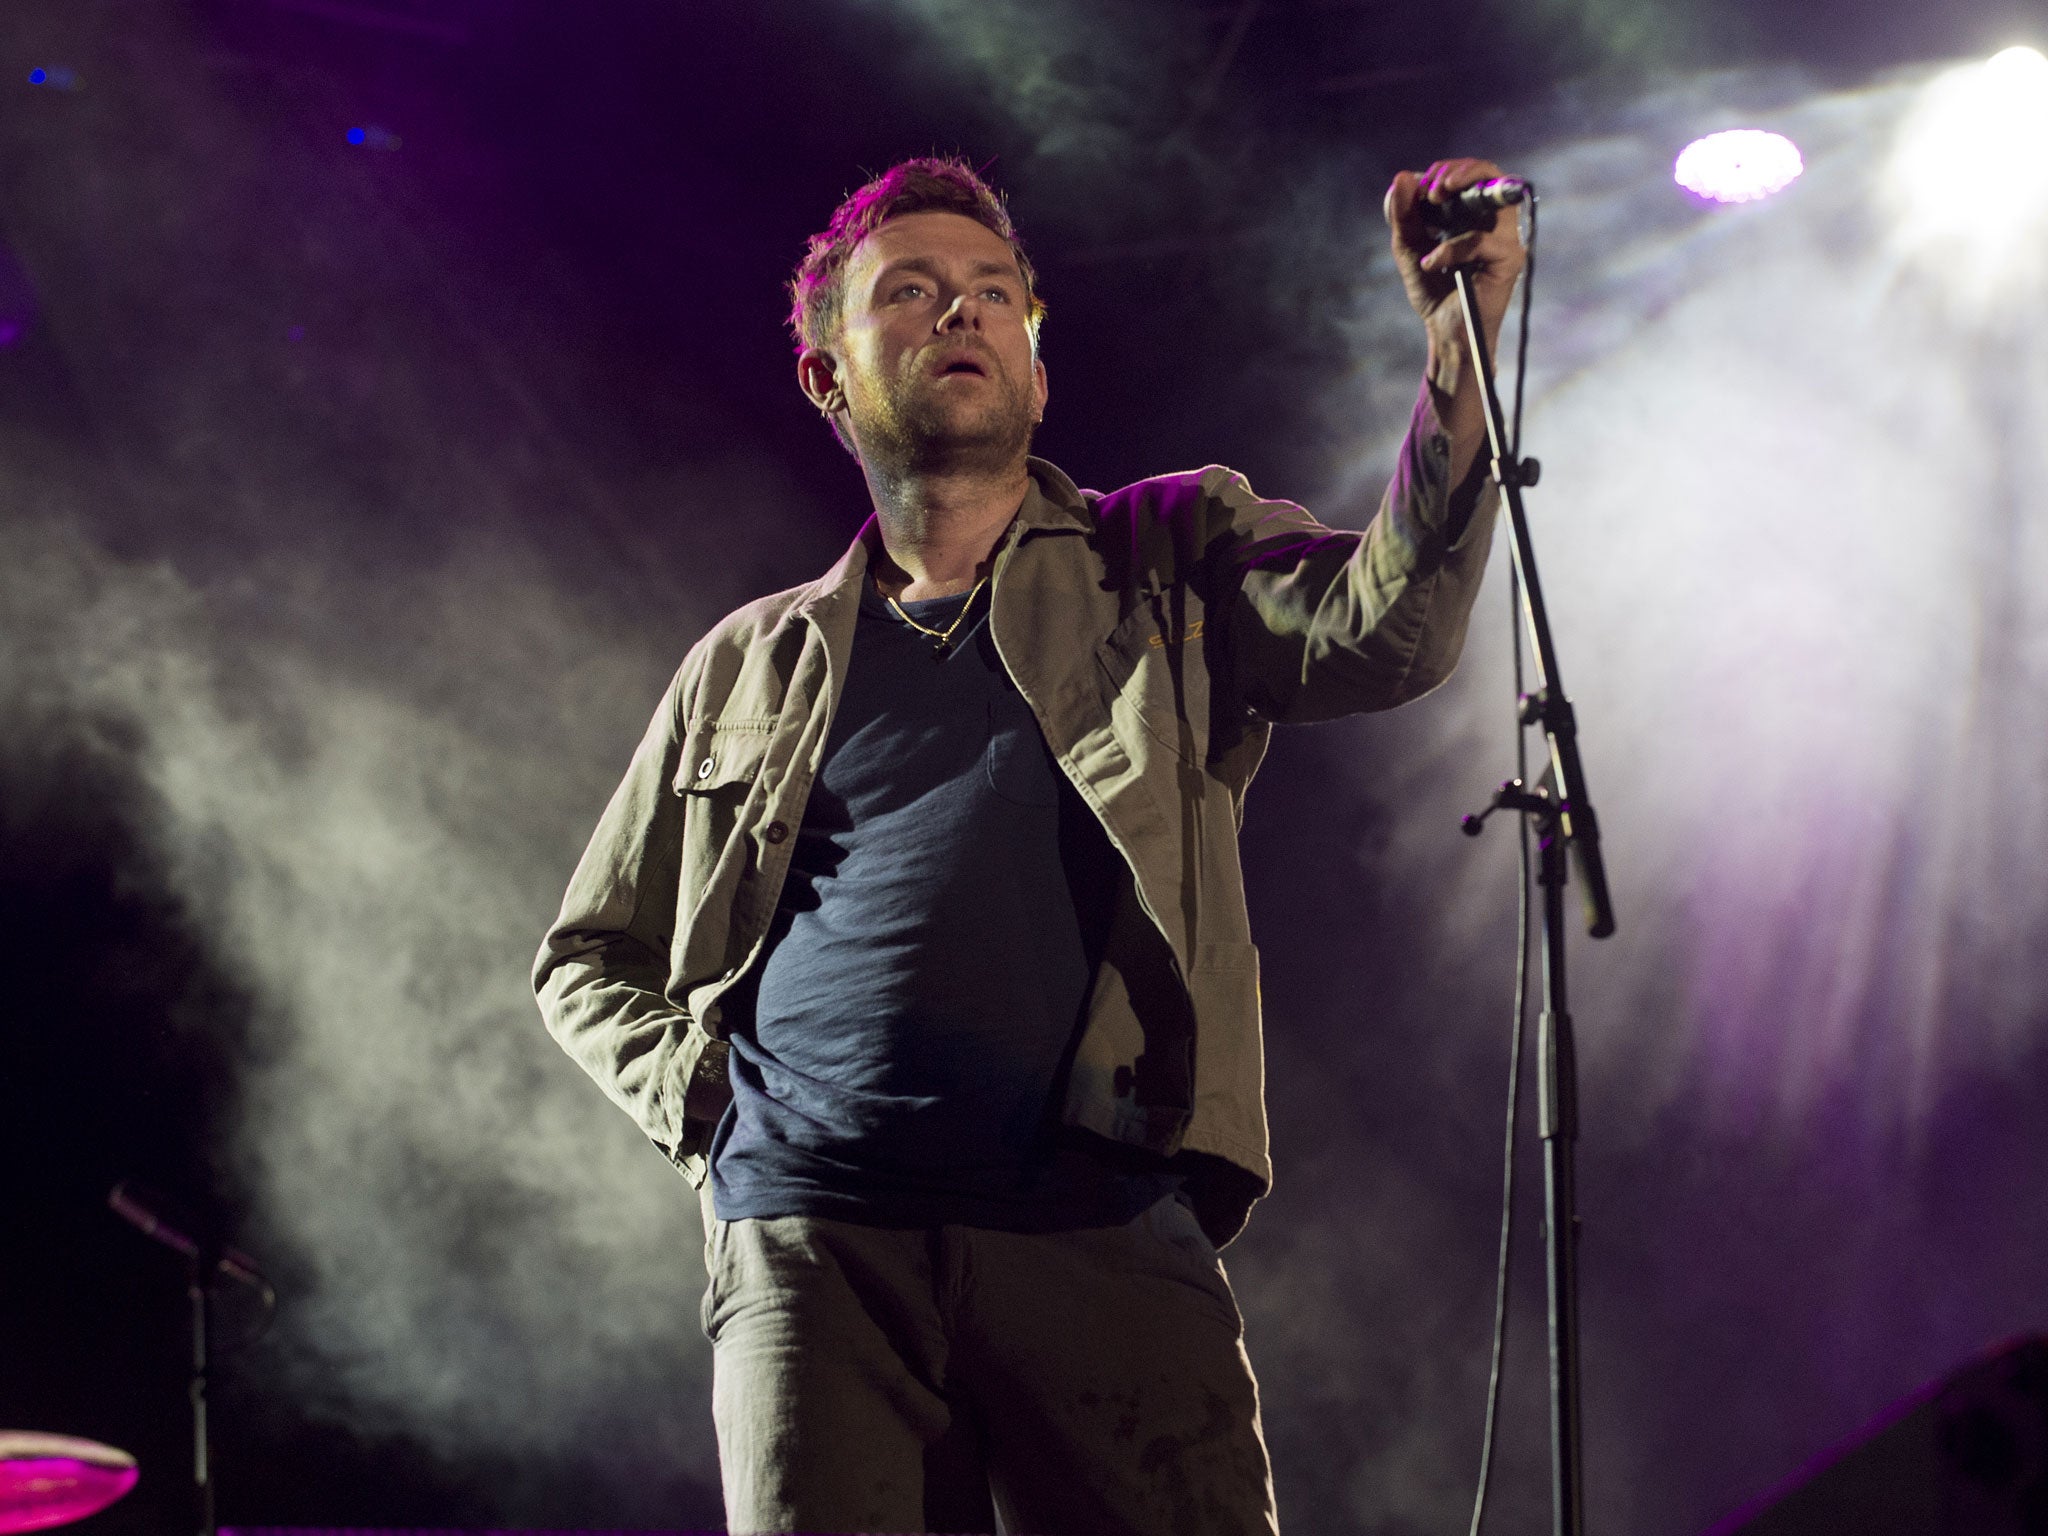 Damon Albarn is joint favourite to win the Mercury Music Prize